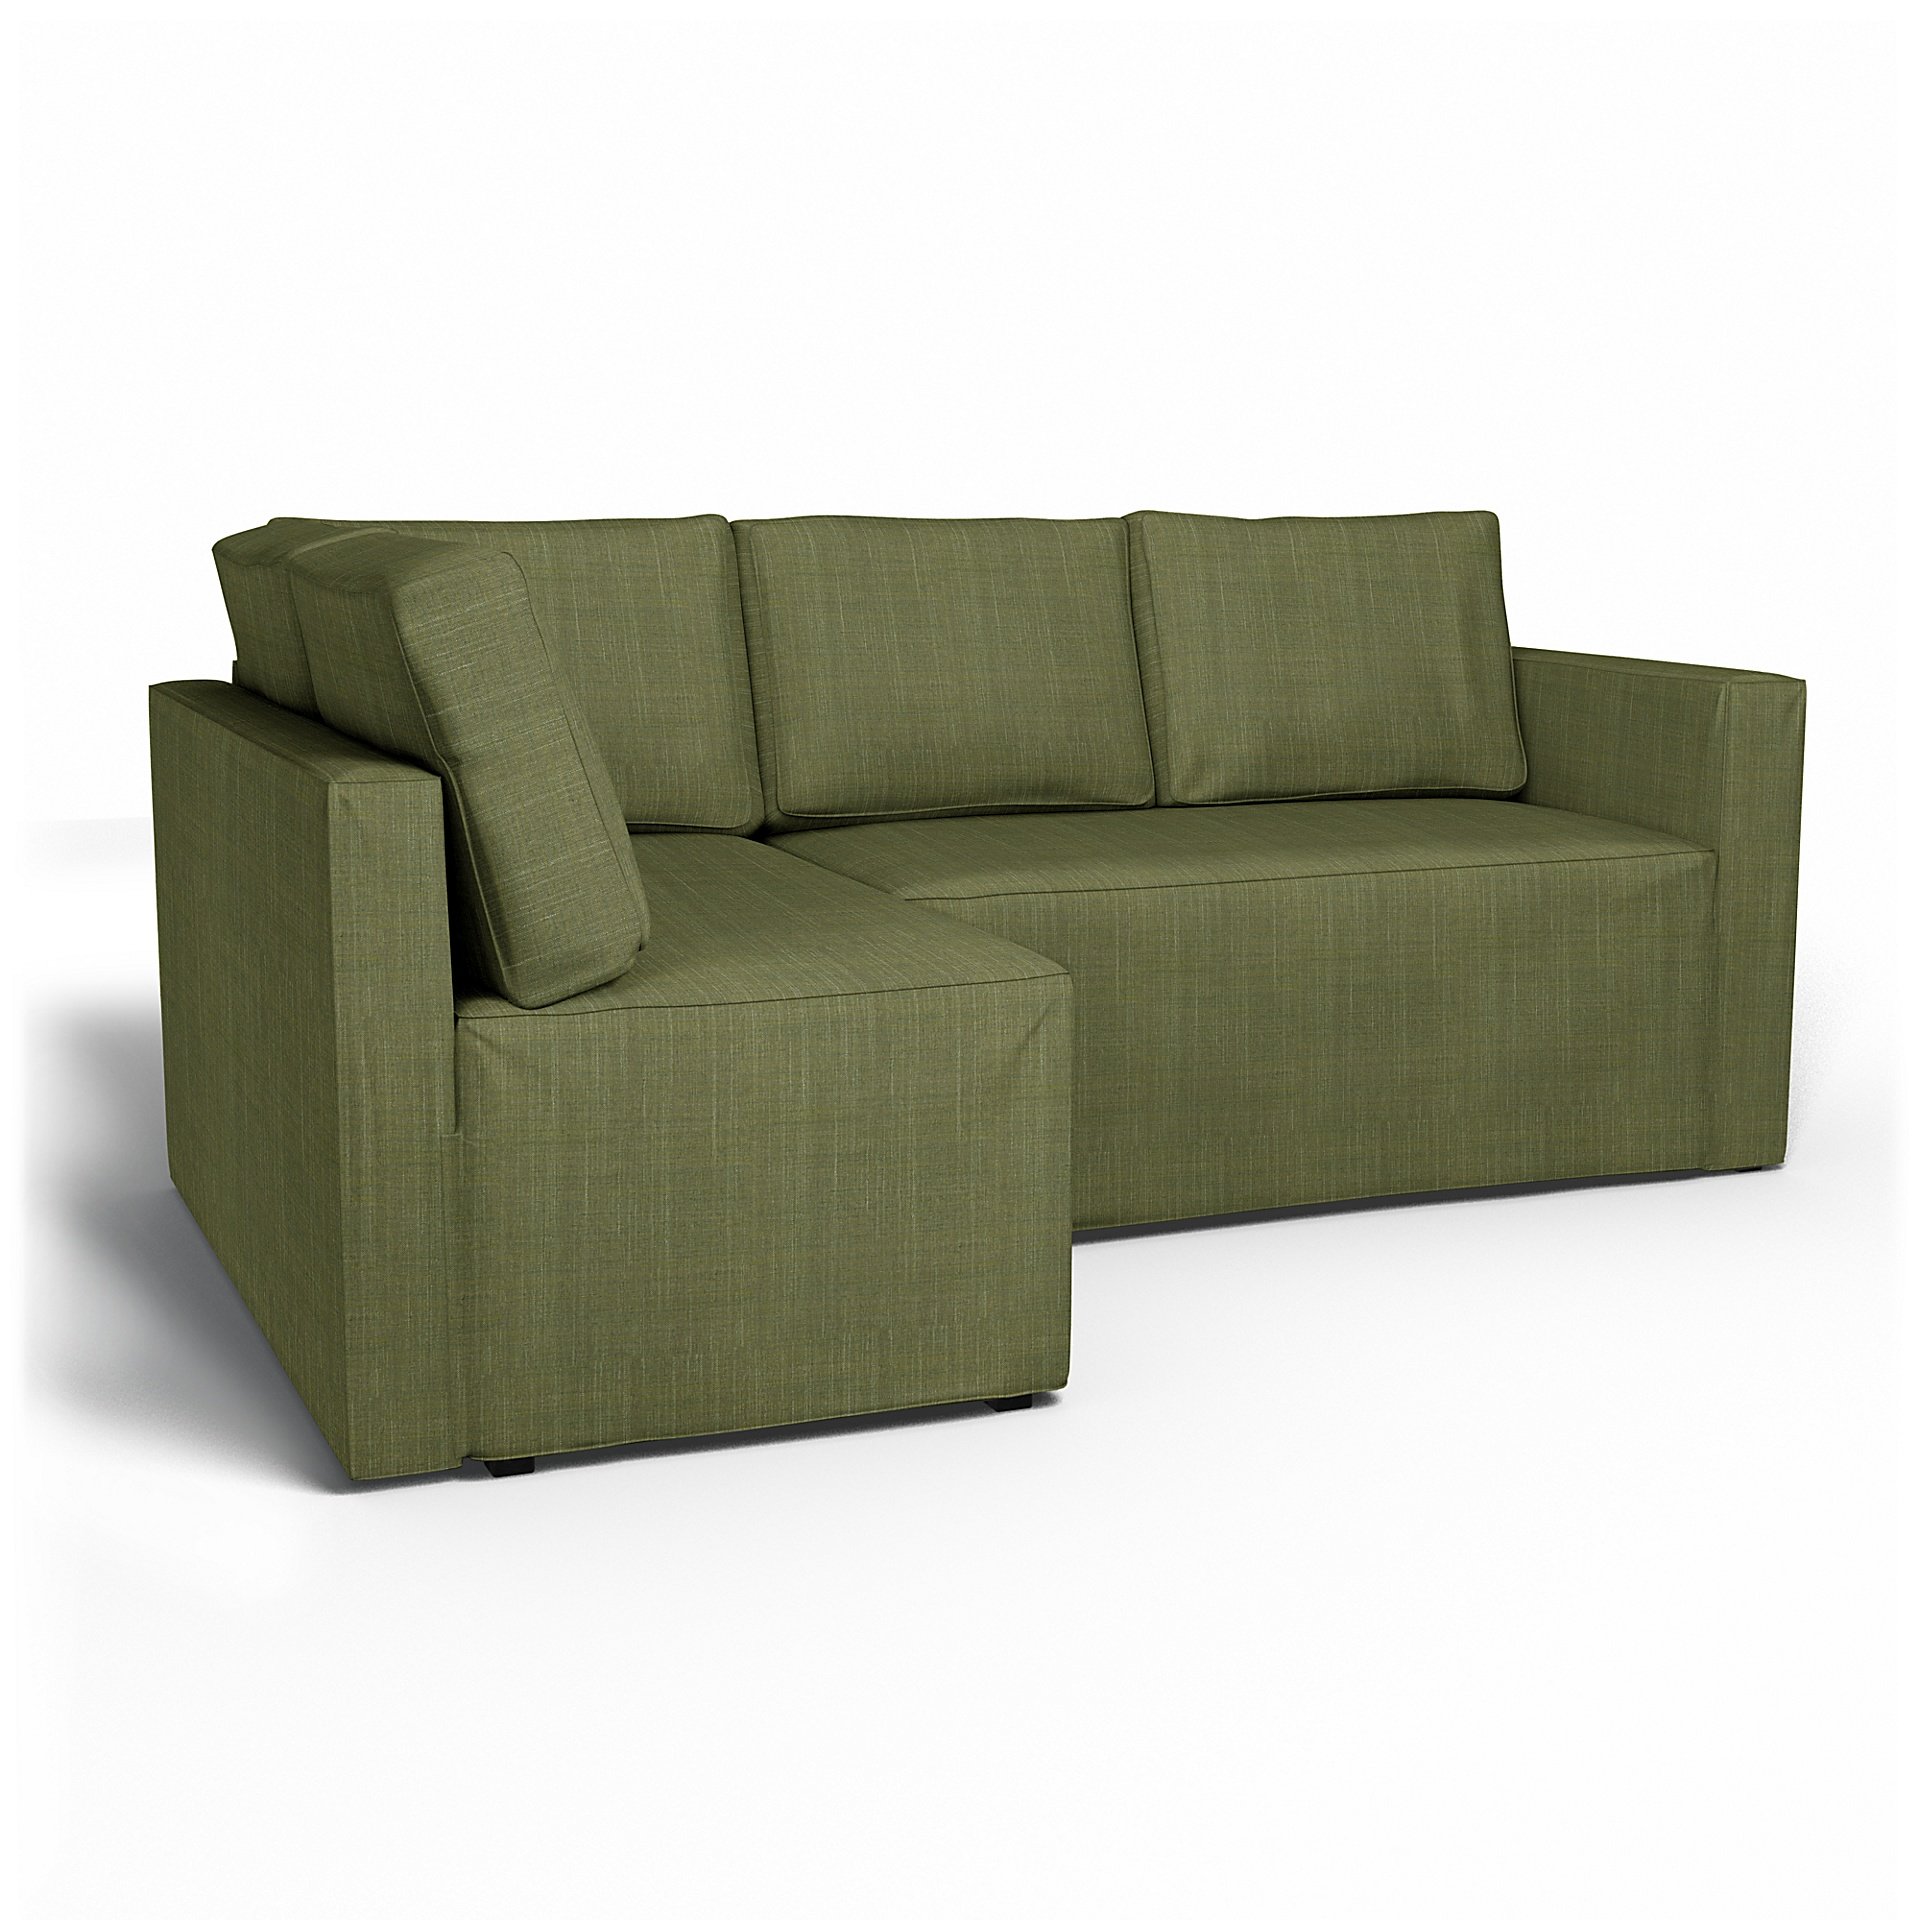 IKEA - Fagelbo Sofa Bed with Left Chaise Cover, Moss Green, Boucle & Texture - Bemz